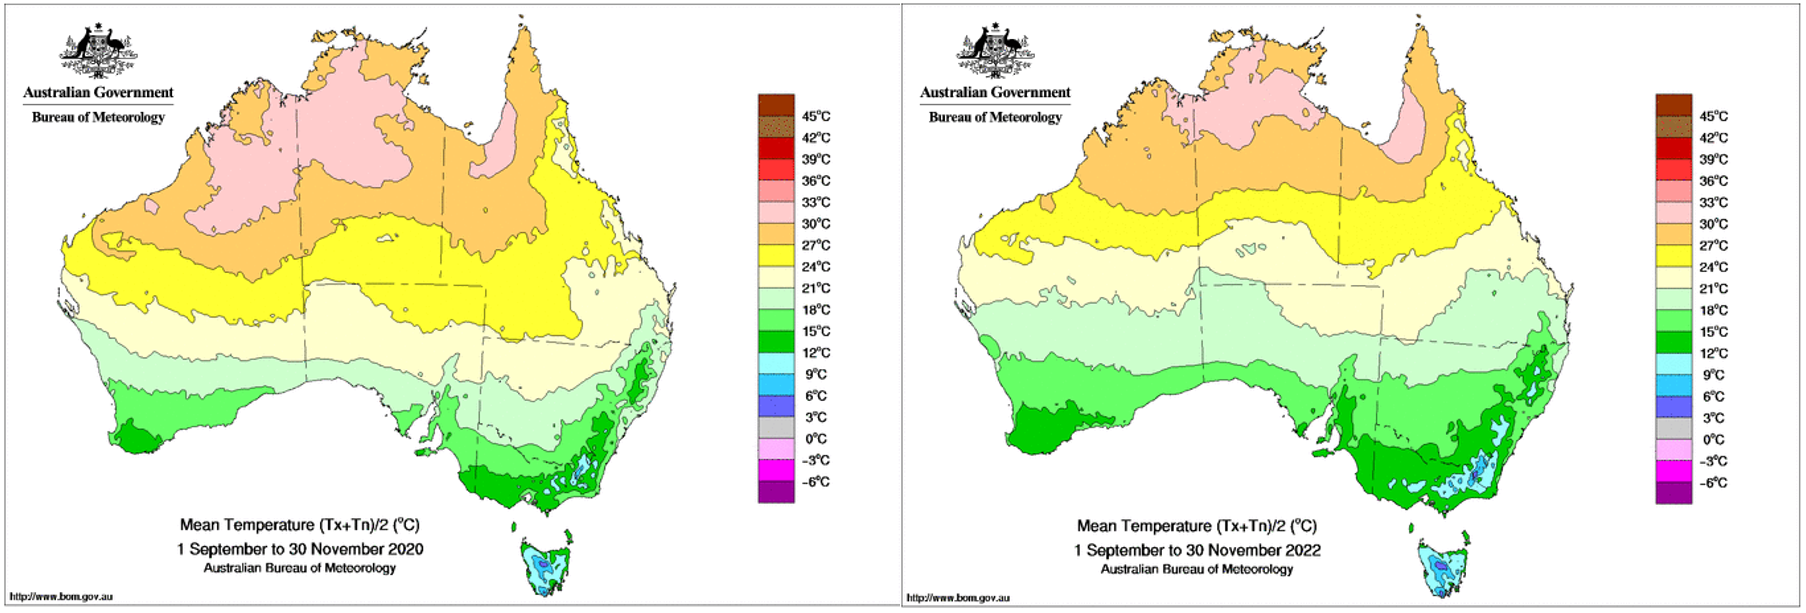 Maps of Australia showing the mean daily temperature for spring (Sep-Nov) in 2020 (left) compared with 2022 (right).